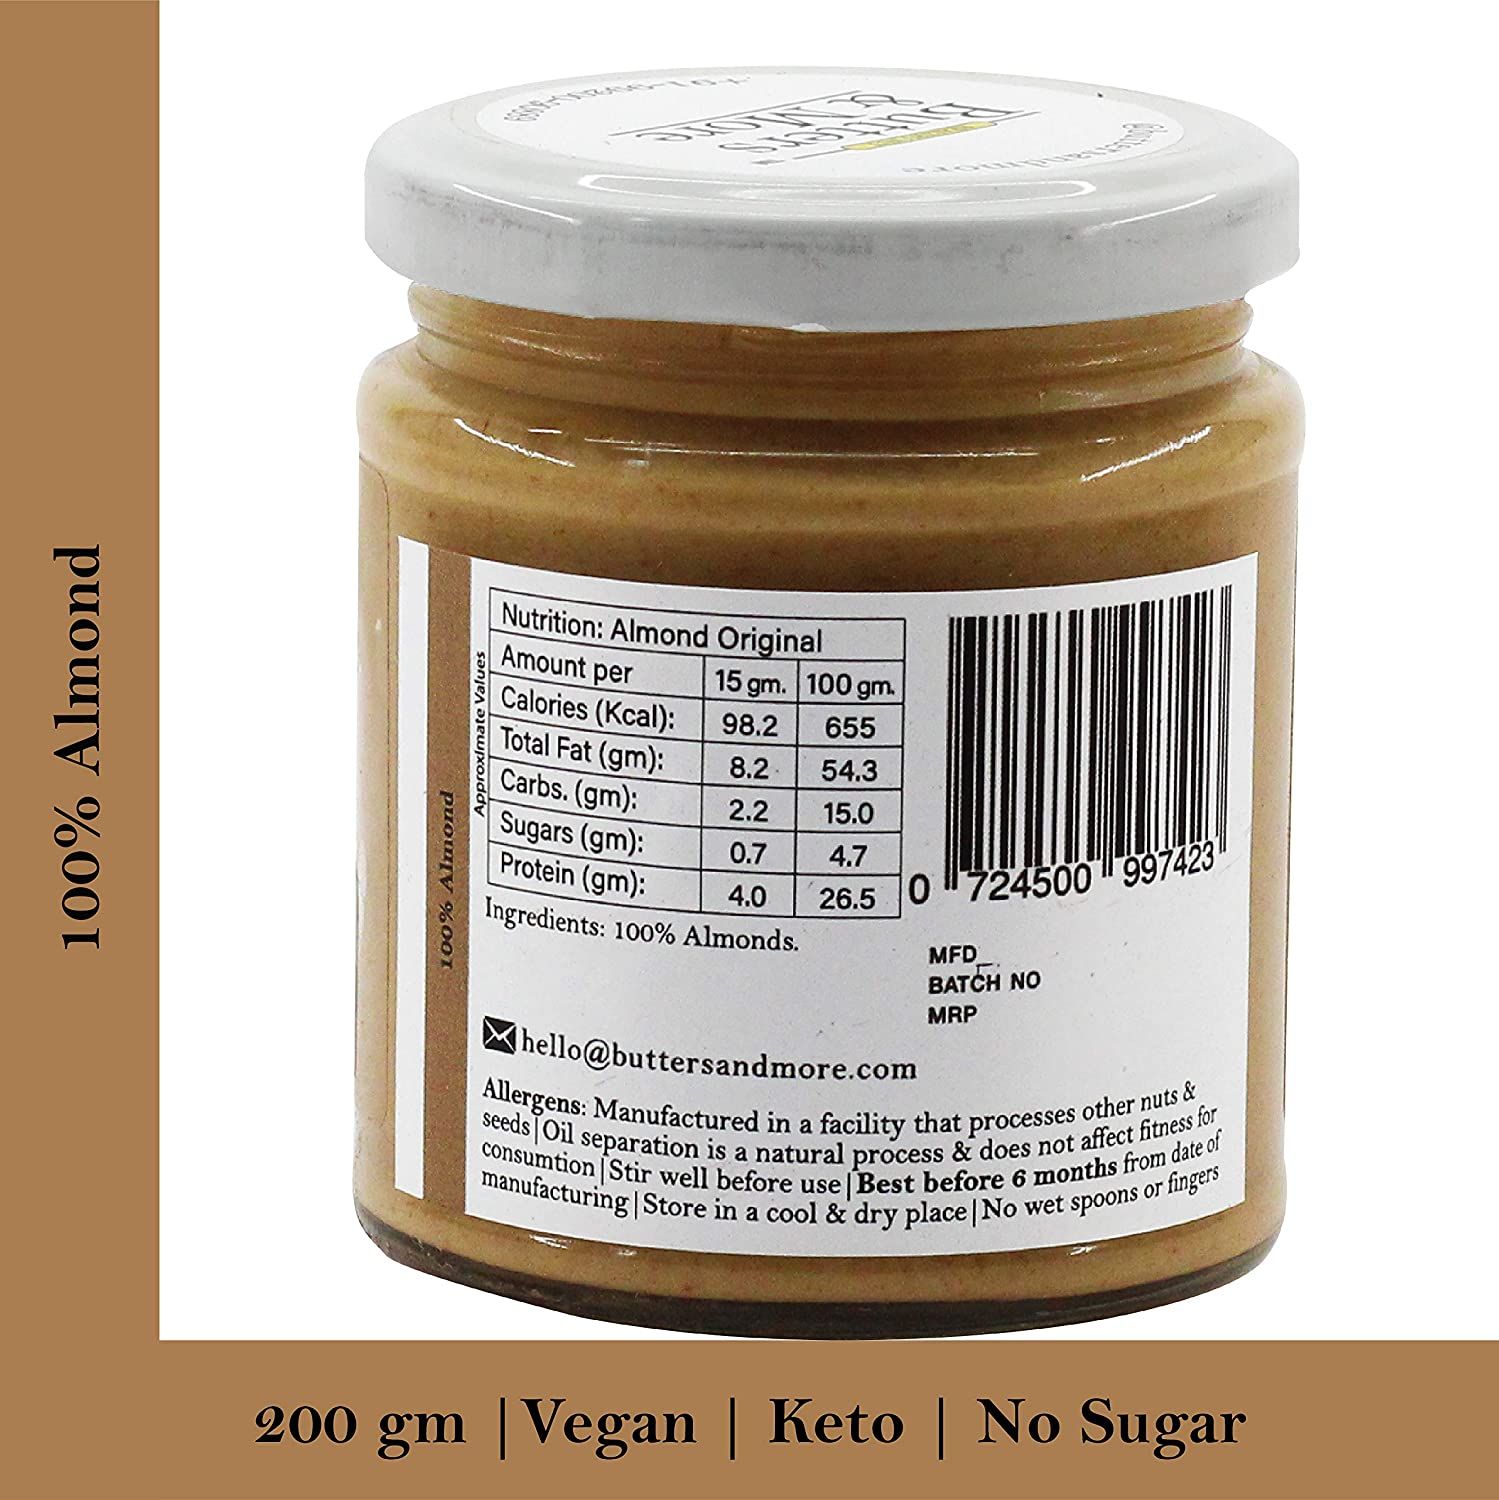 Butters & More Vegan Natural Almond Butter Image